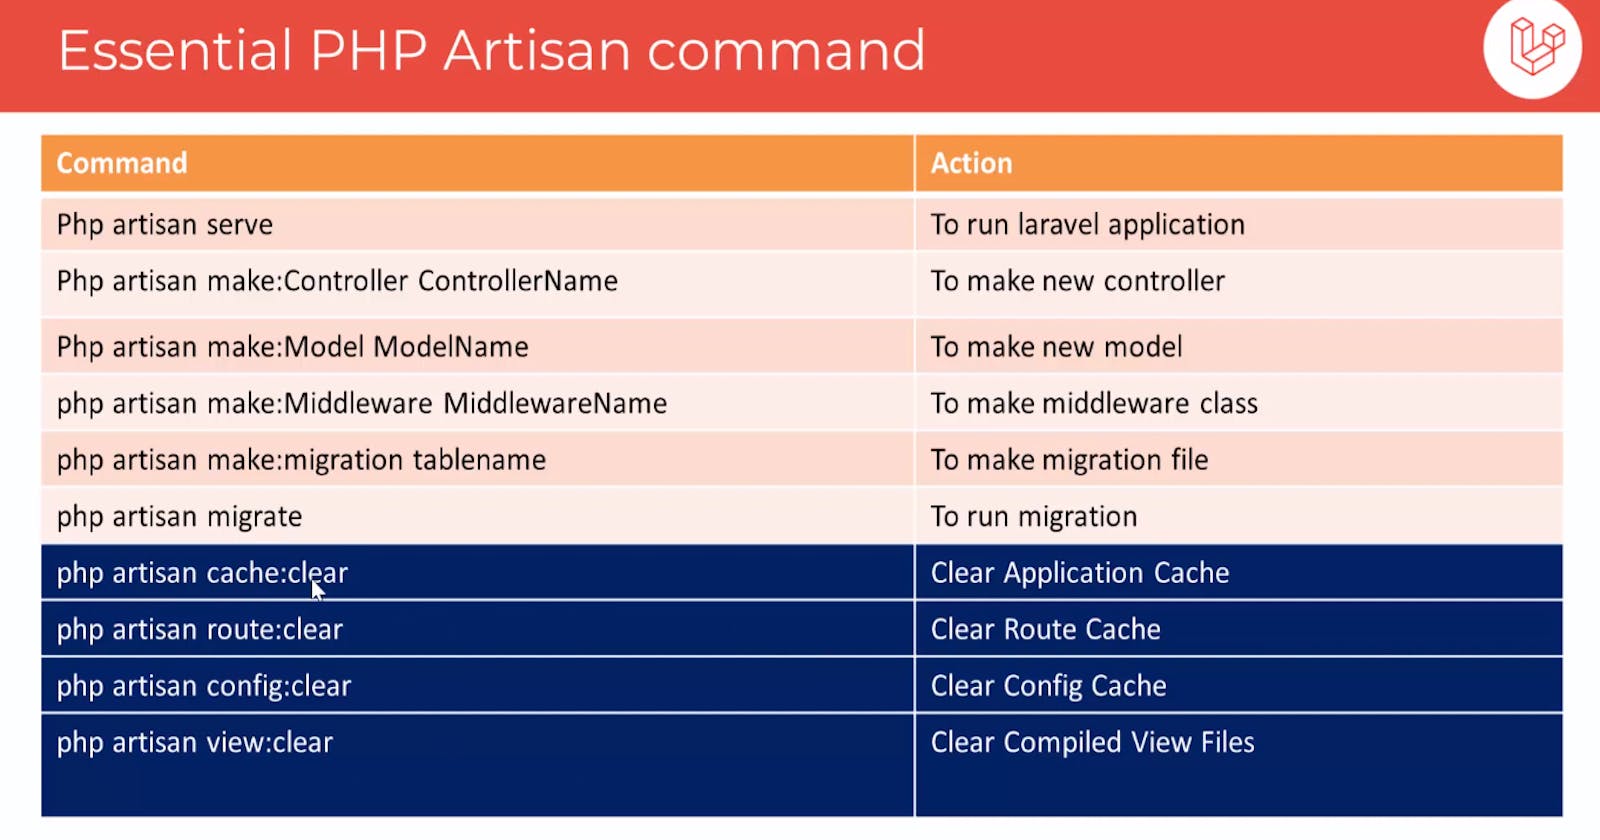 Essential PHP Artisan command